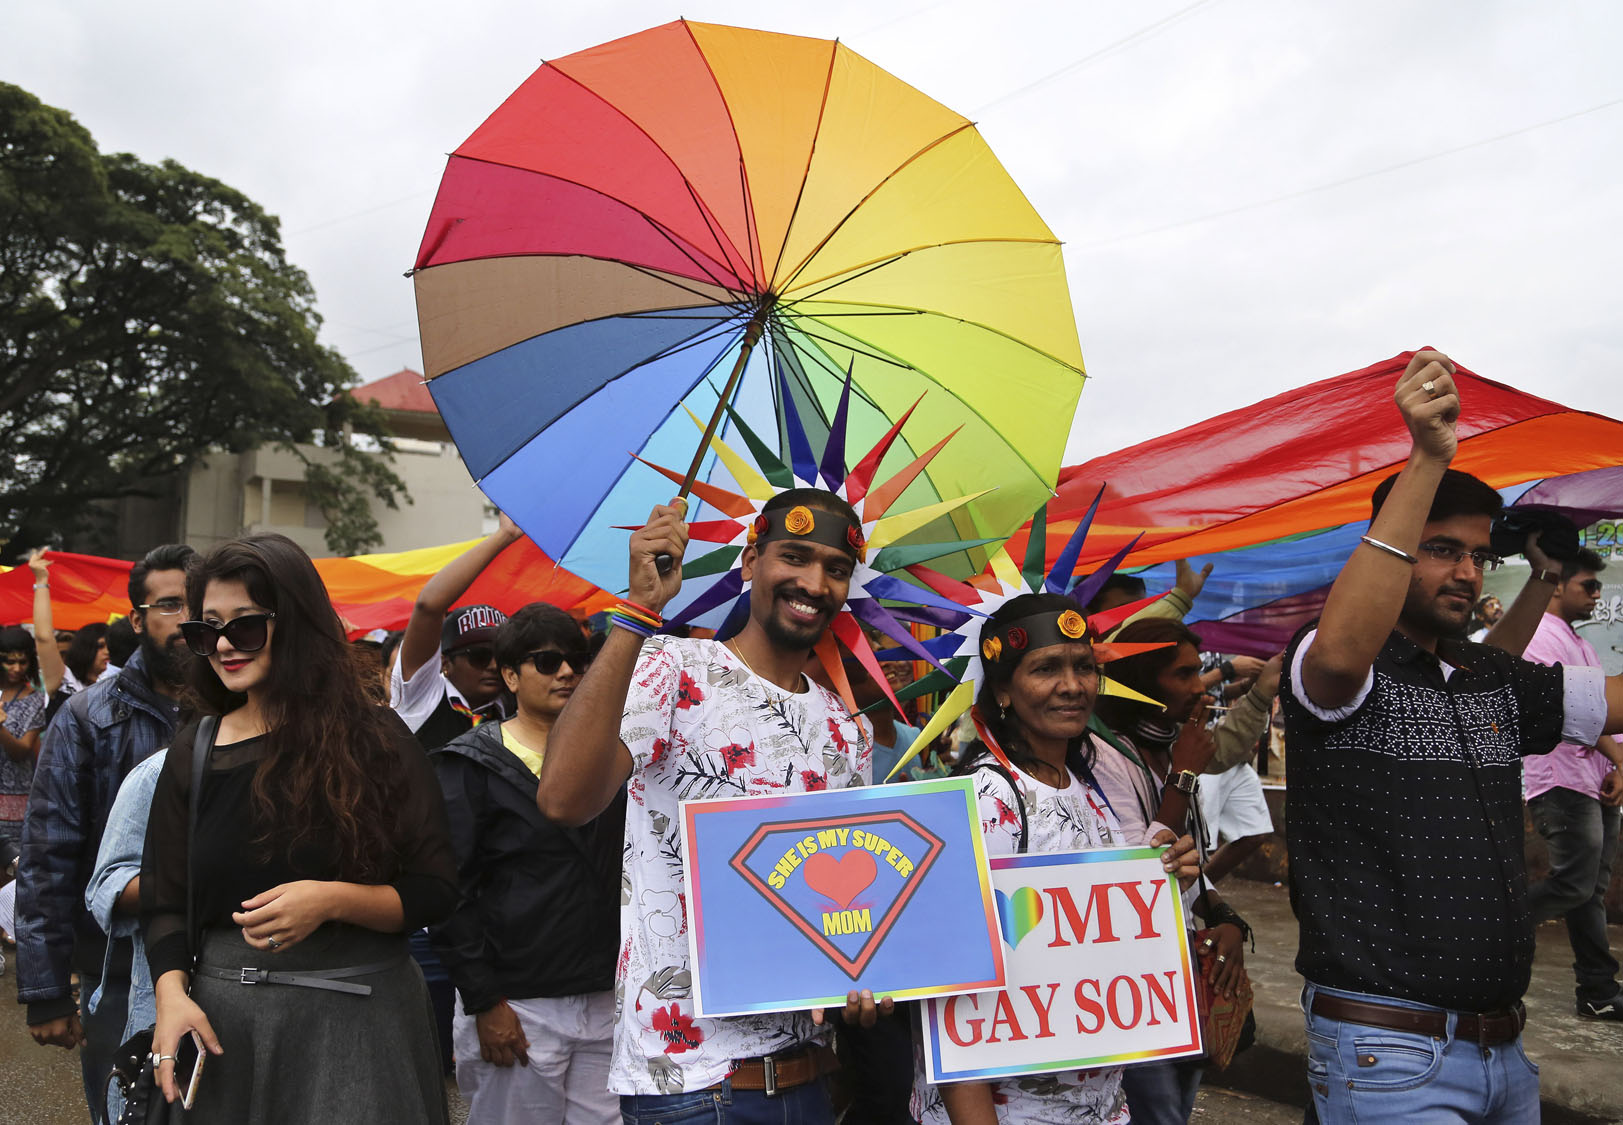 why was it necessary to revise section 377